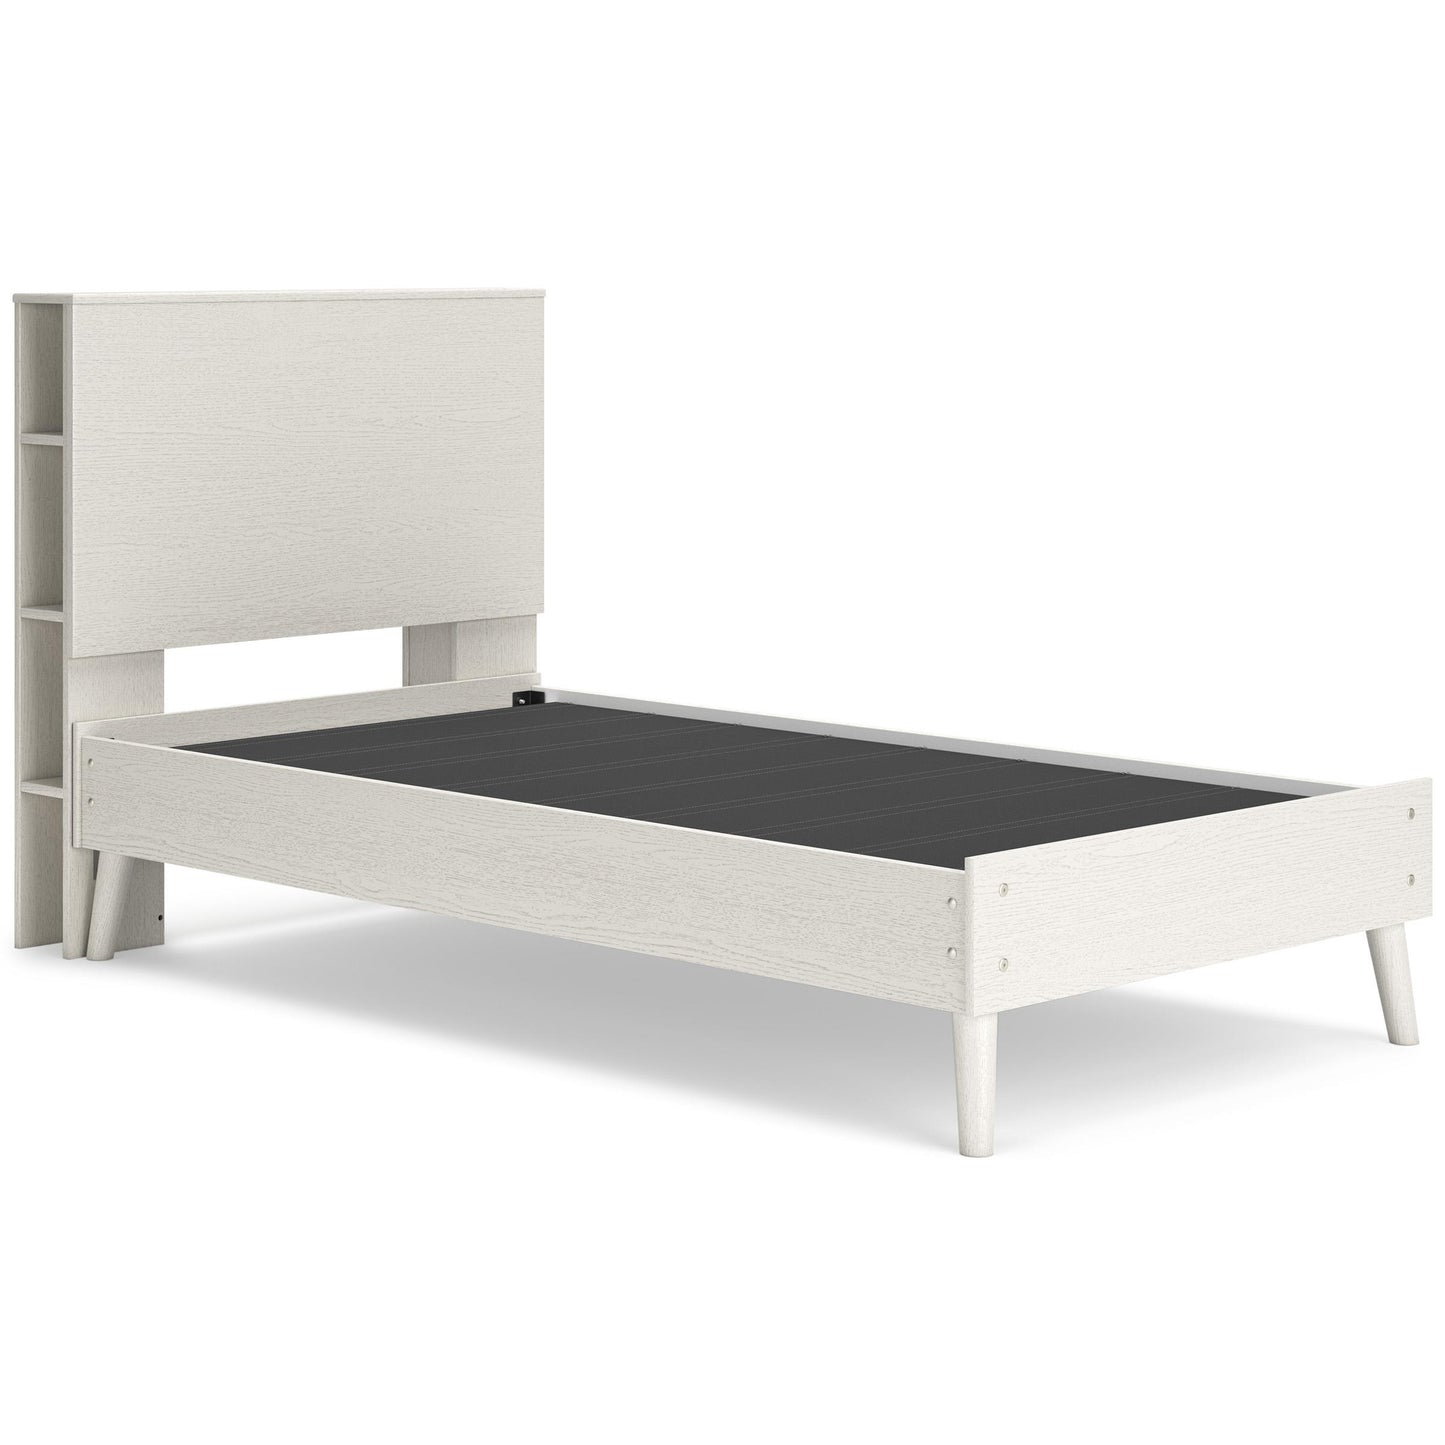 Signature Design by Ashley Kids Beds Bed EB1024-163/EB1024-111 IMAGE 4